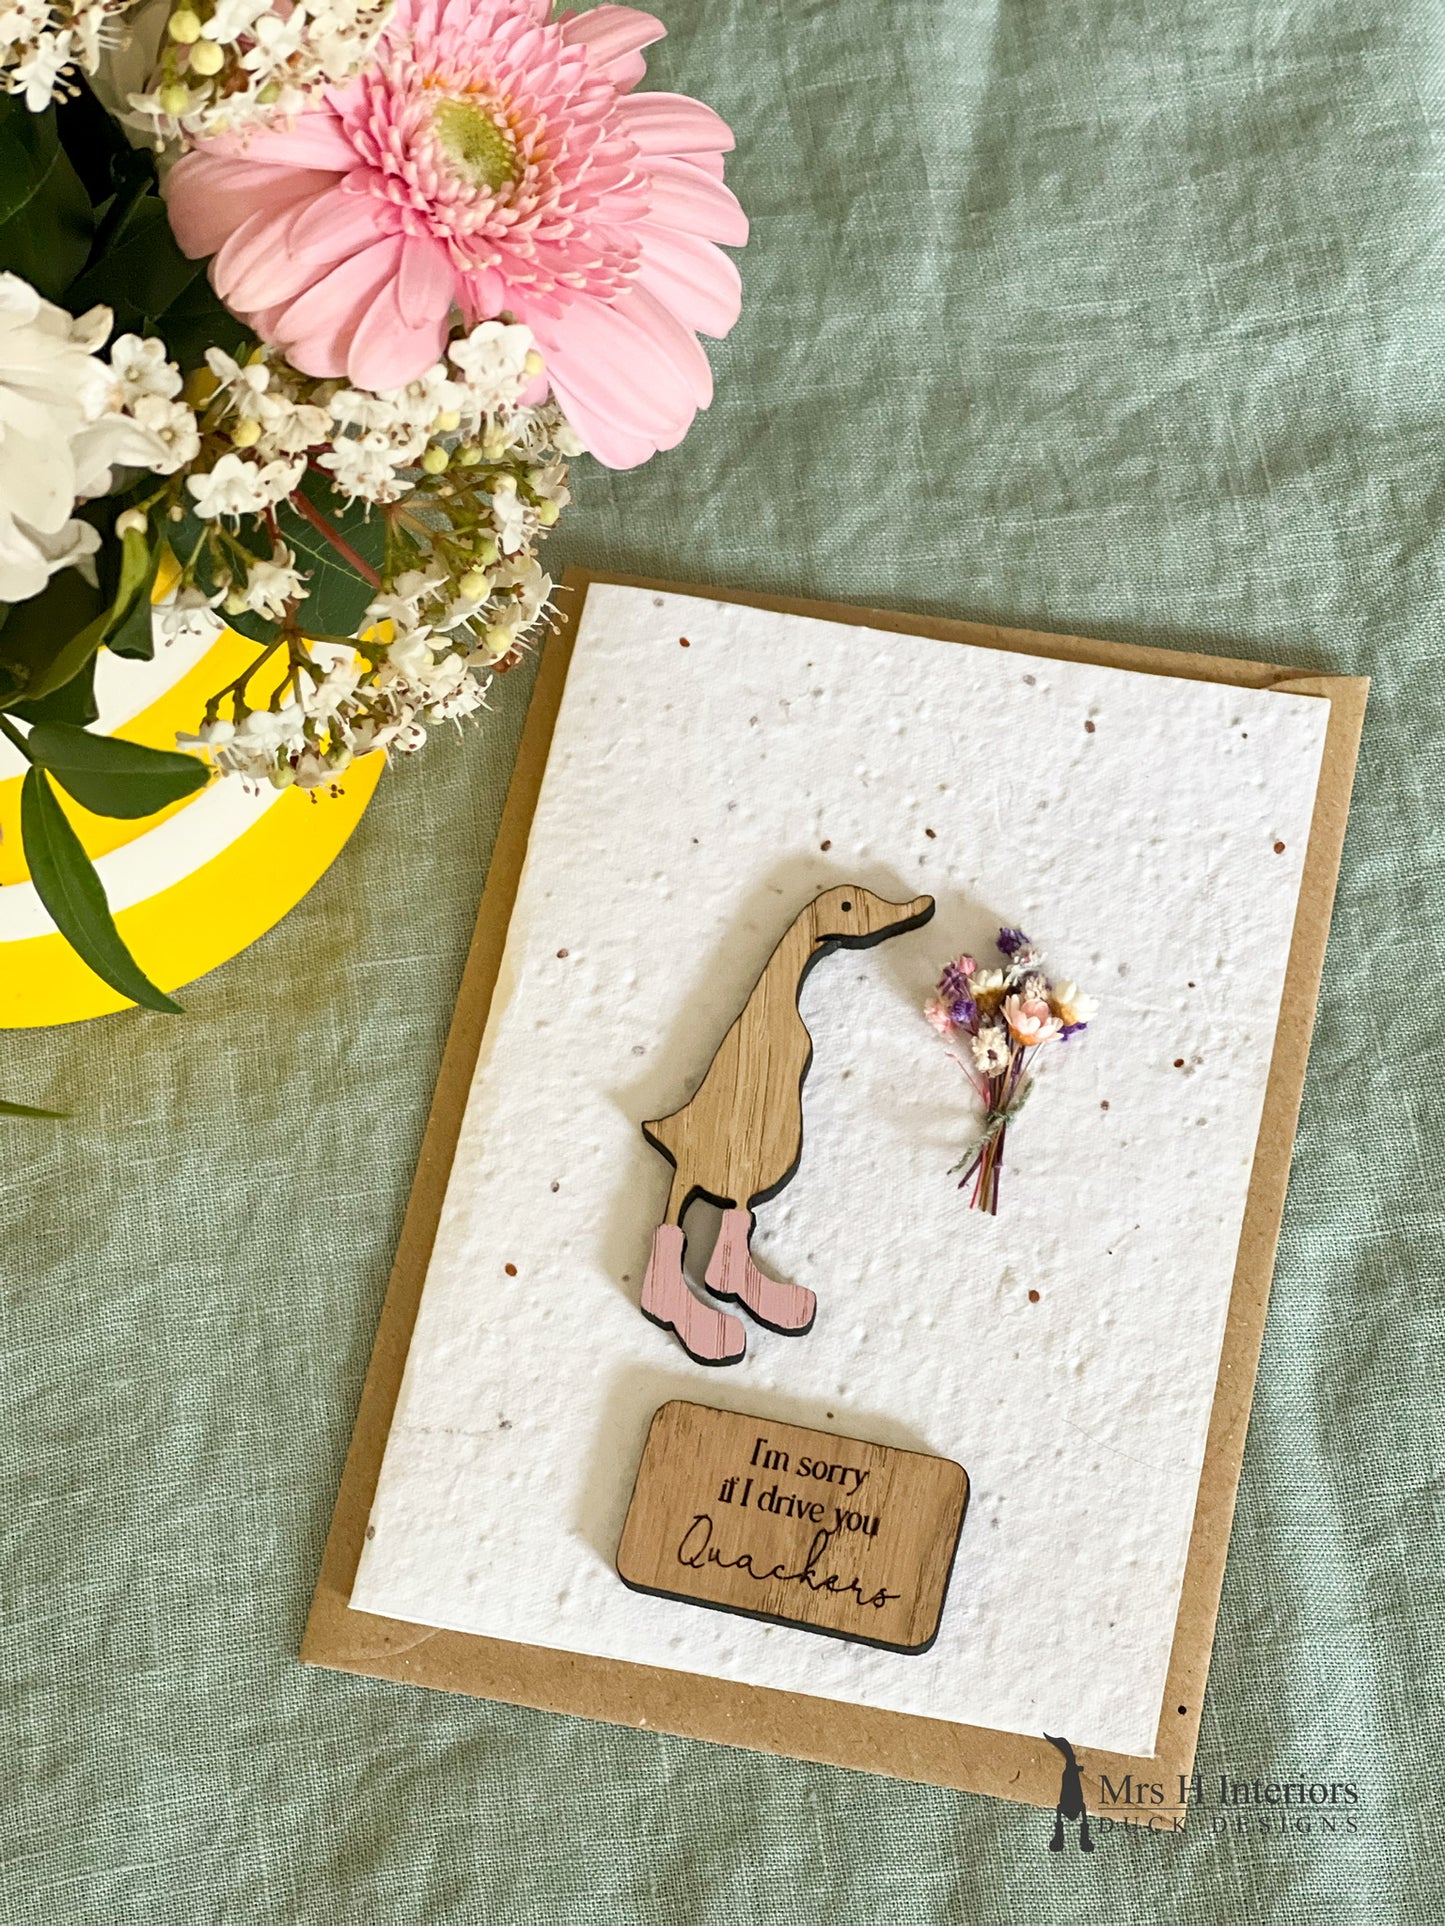 I'm Sorry If I Drive You Quackers - Mother's Day Card - Duck with Flowers - Decorated Wooden Duck in Boots by Mrs H the Duck Lady